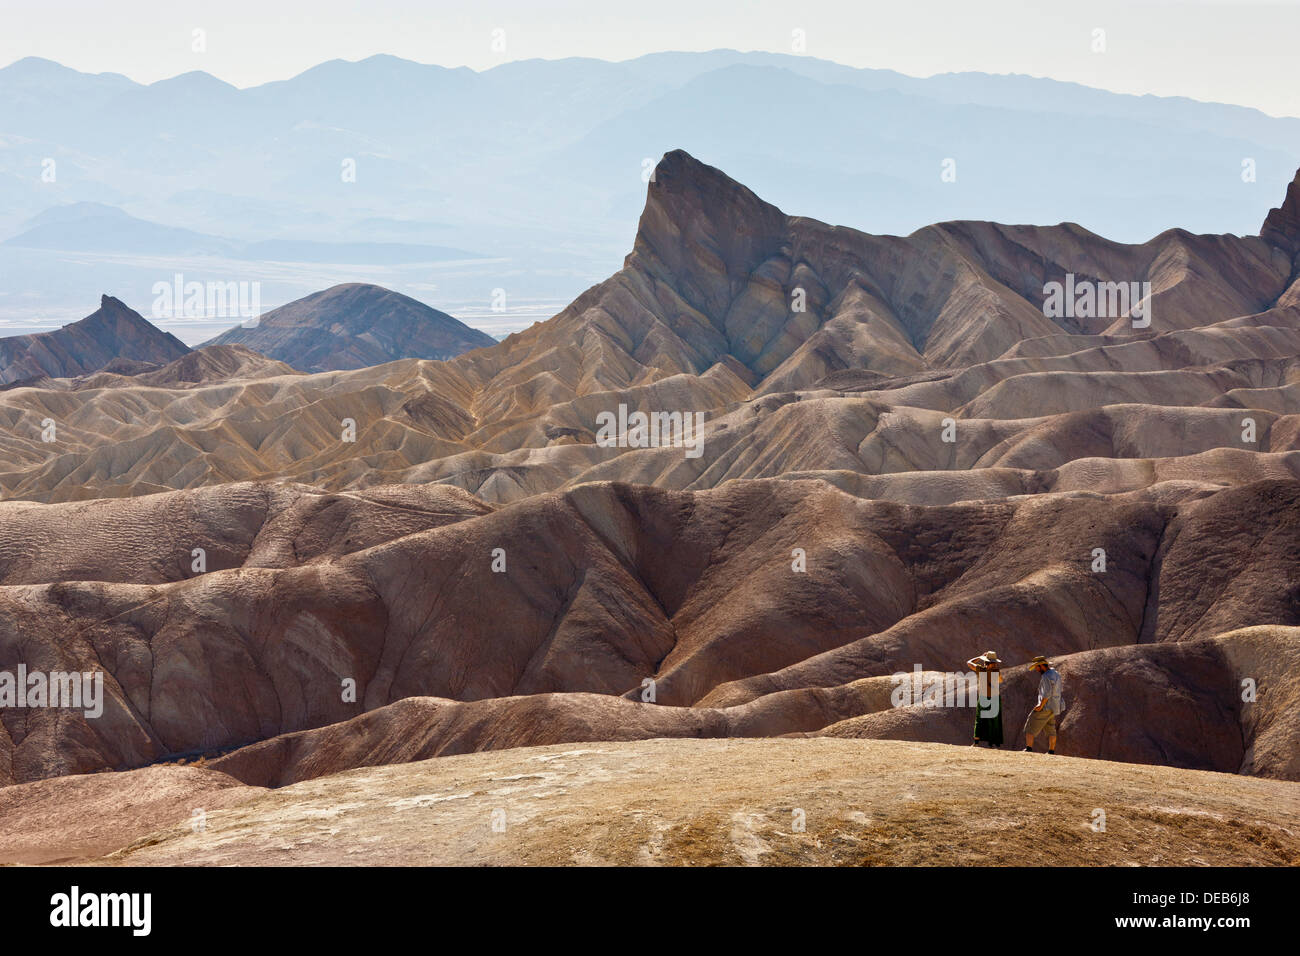 Landscape with Manly Beacon at Zabriskie Point, Death Valley, California, USA. JMH5371 Stock Photo